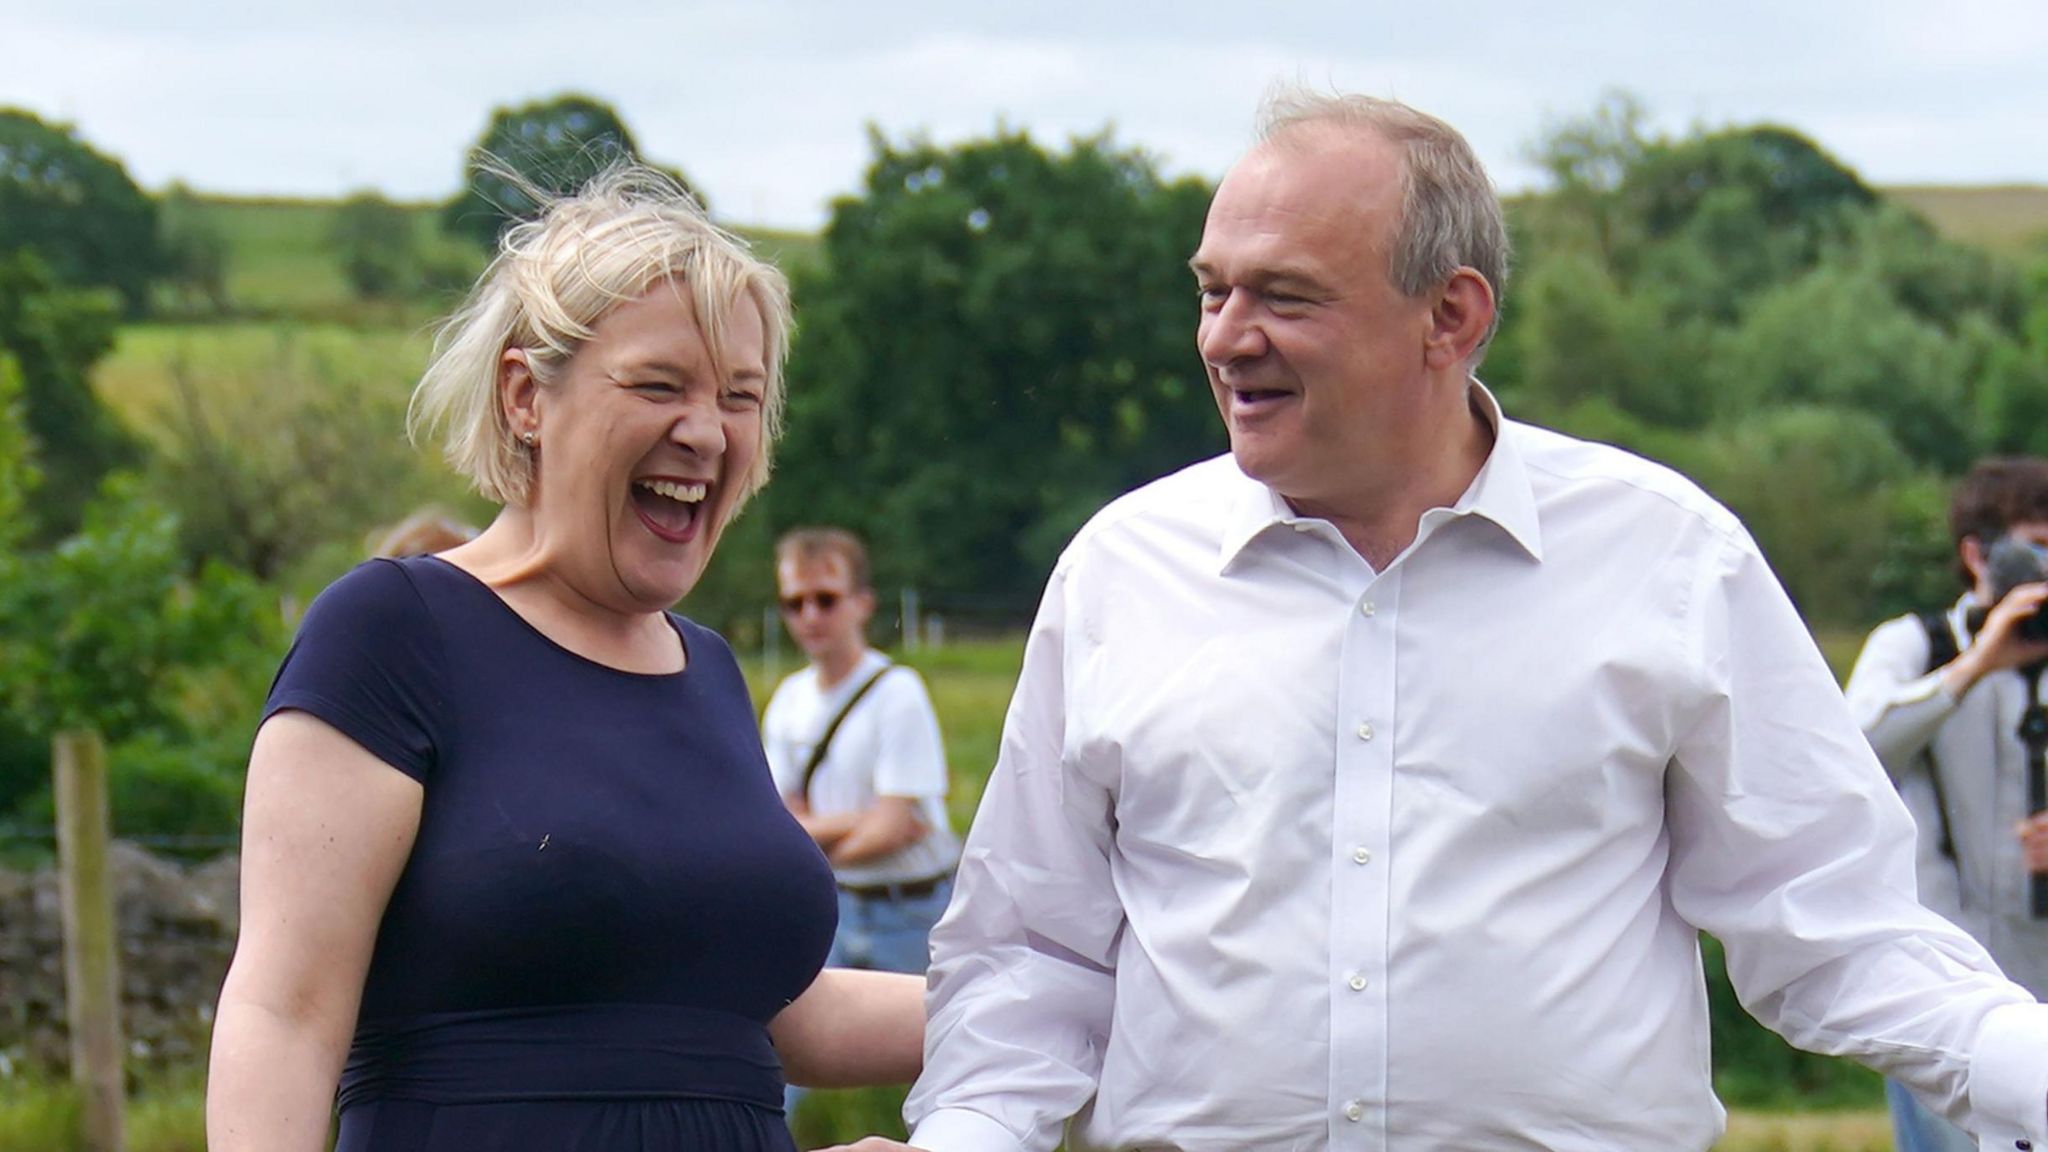 Liberal Democrat leader Sir Ed Davey with Lisa Smart, Liberal Democrat candidate for Hazel Grove (on his left) during a visit to Vale House, Marple Bridge in Greater Manchester while on the General Election campaign trail.